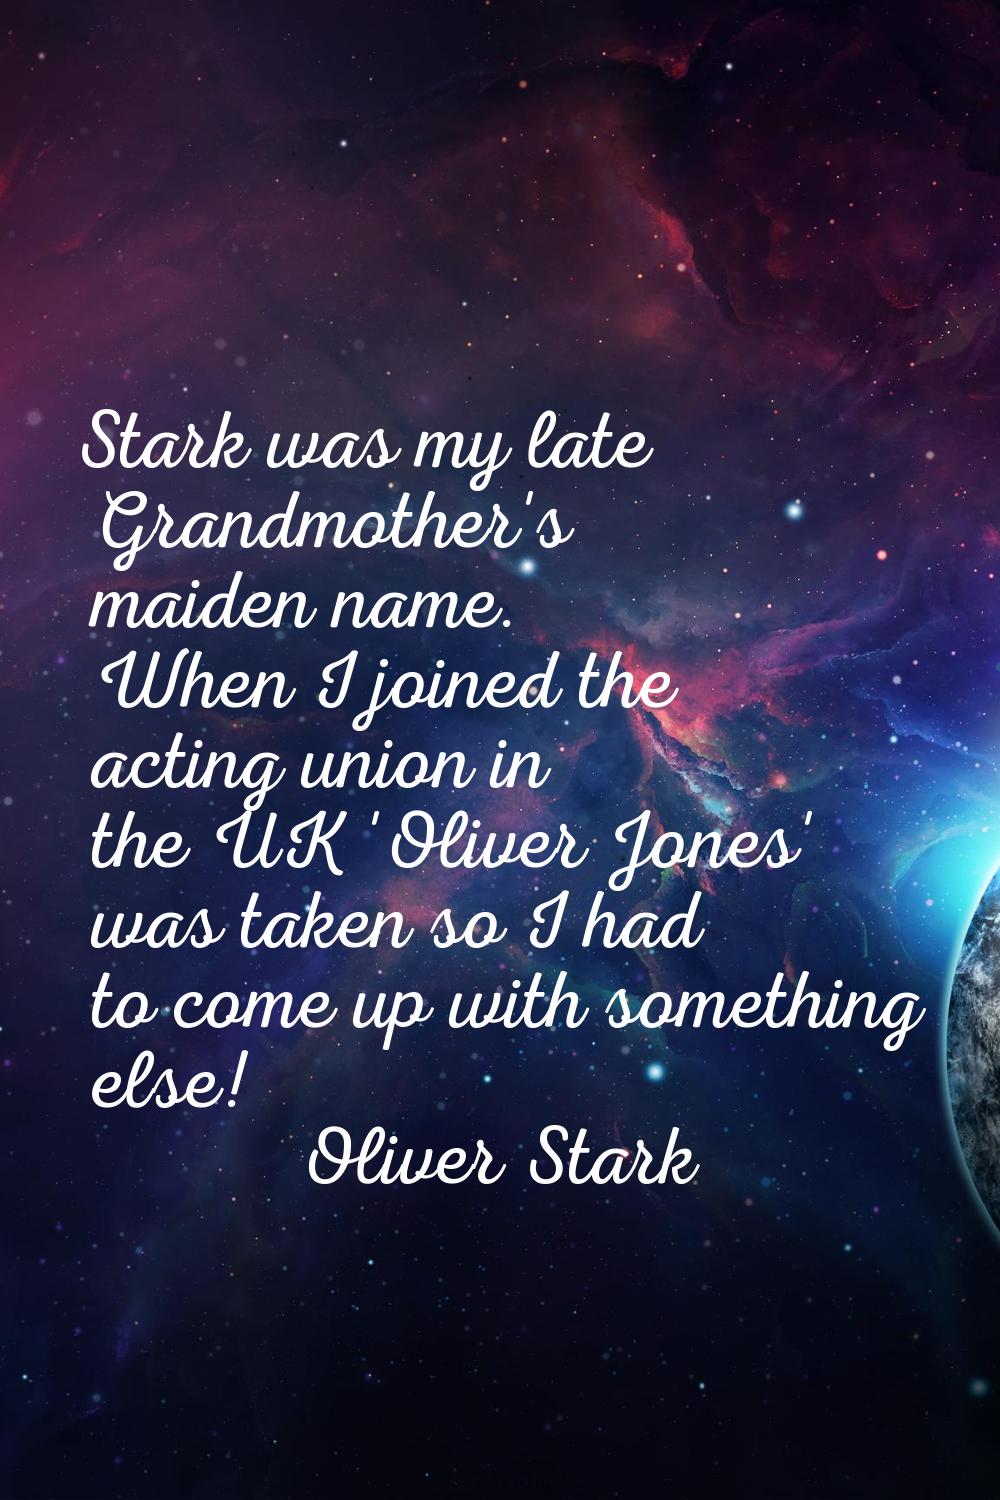 Stark was my late Grandmother's maiden name. When I joined the acting union in the UK 'Oliver Jones